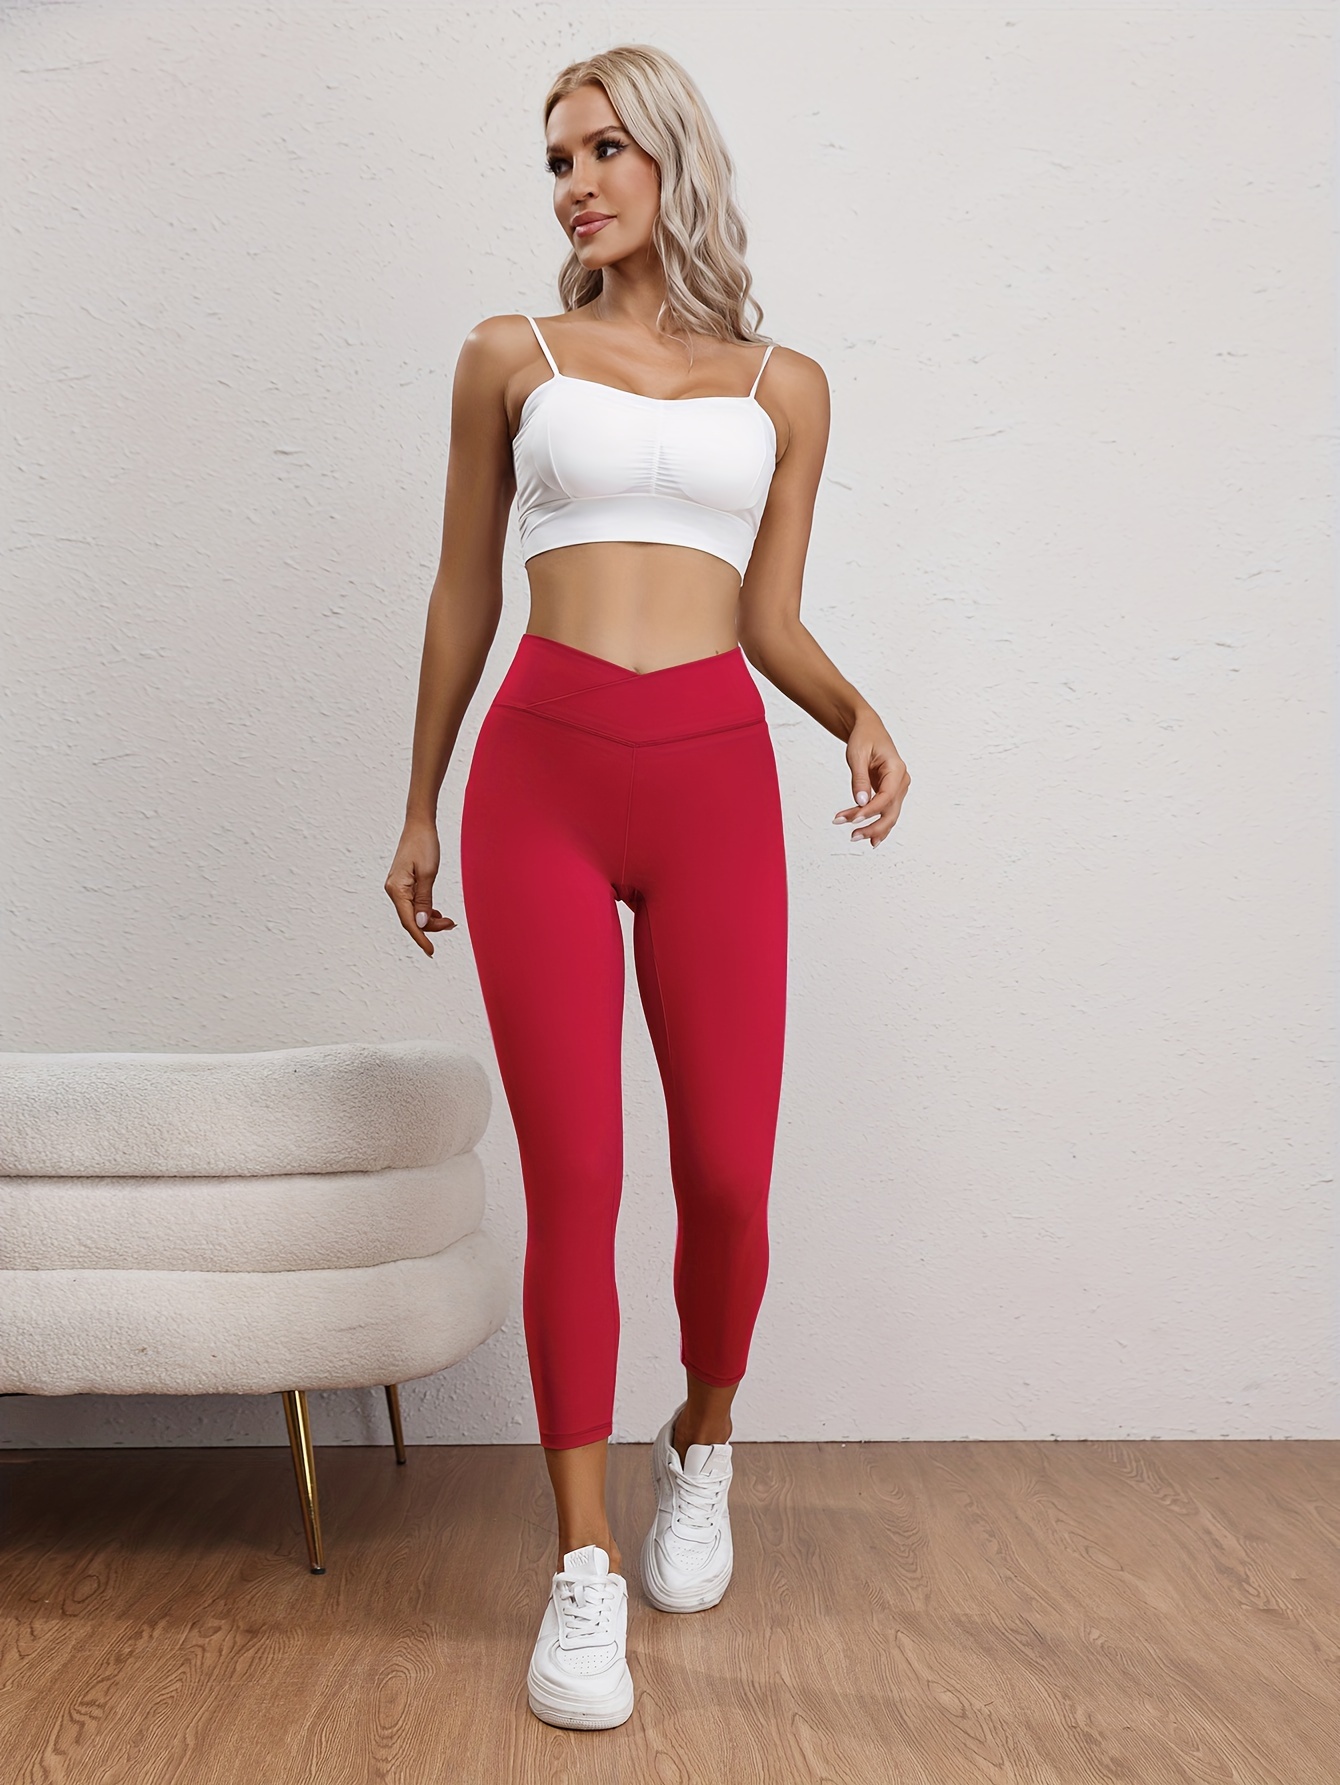 Red High Waisted Butt Lifting Jeans for Women